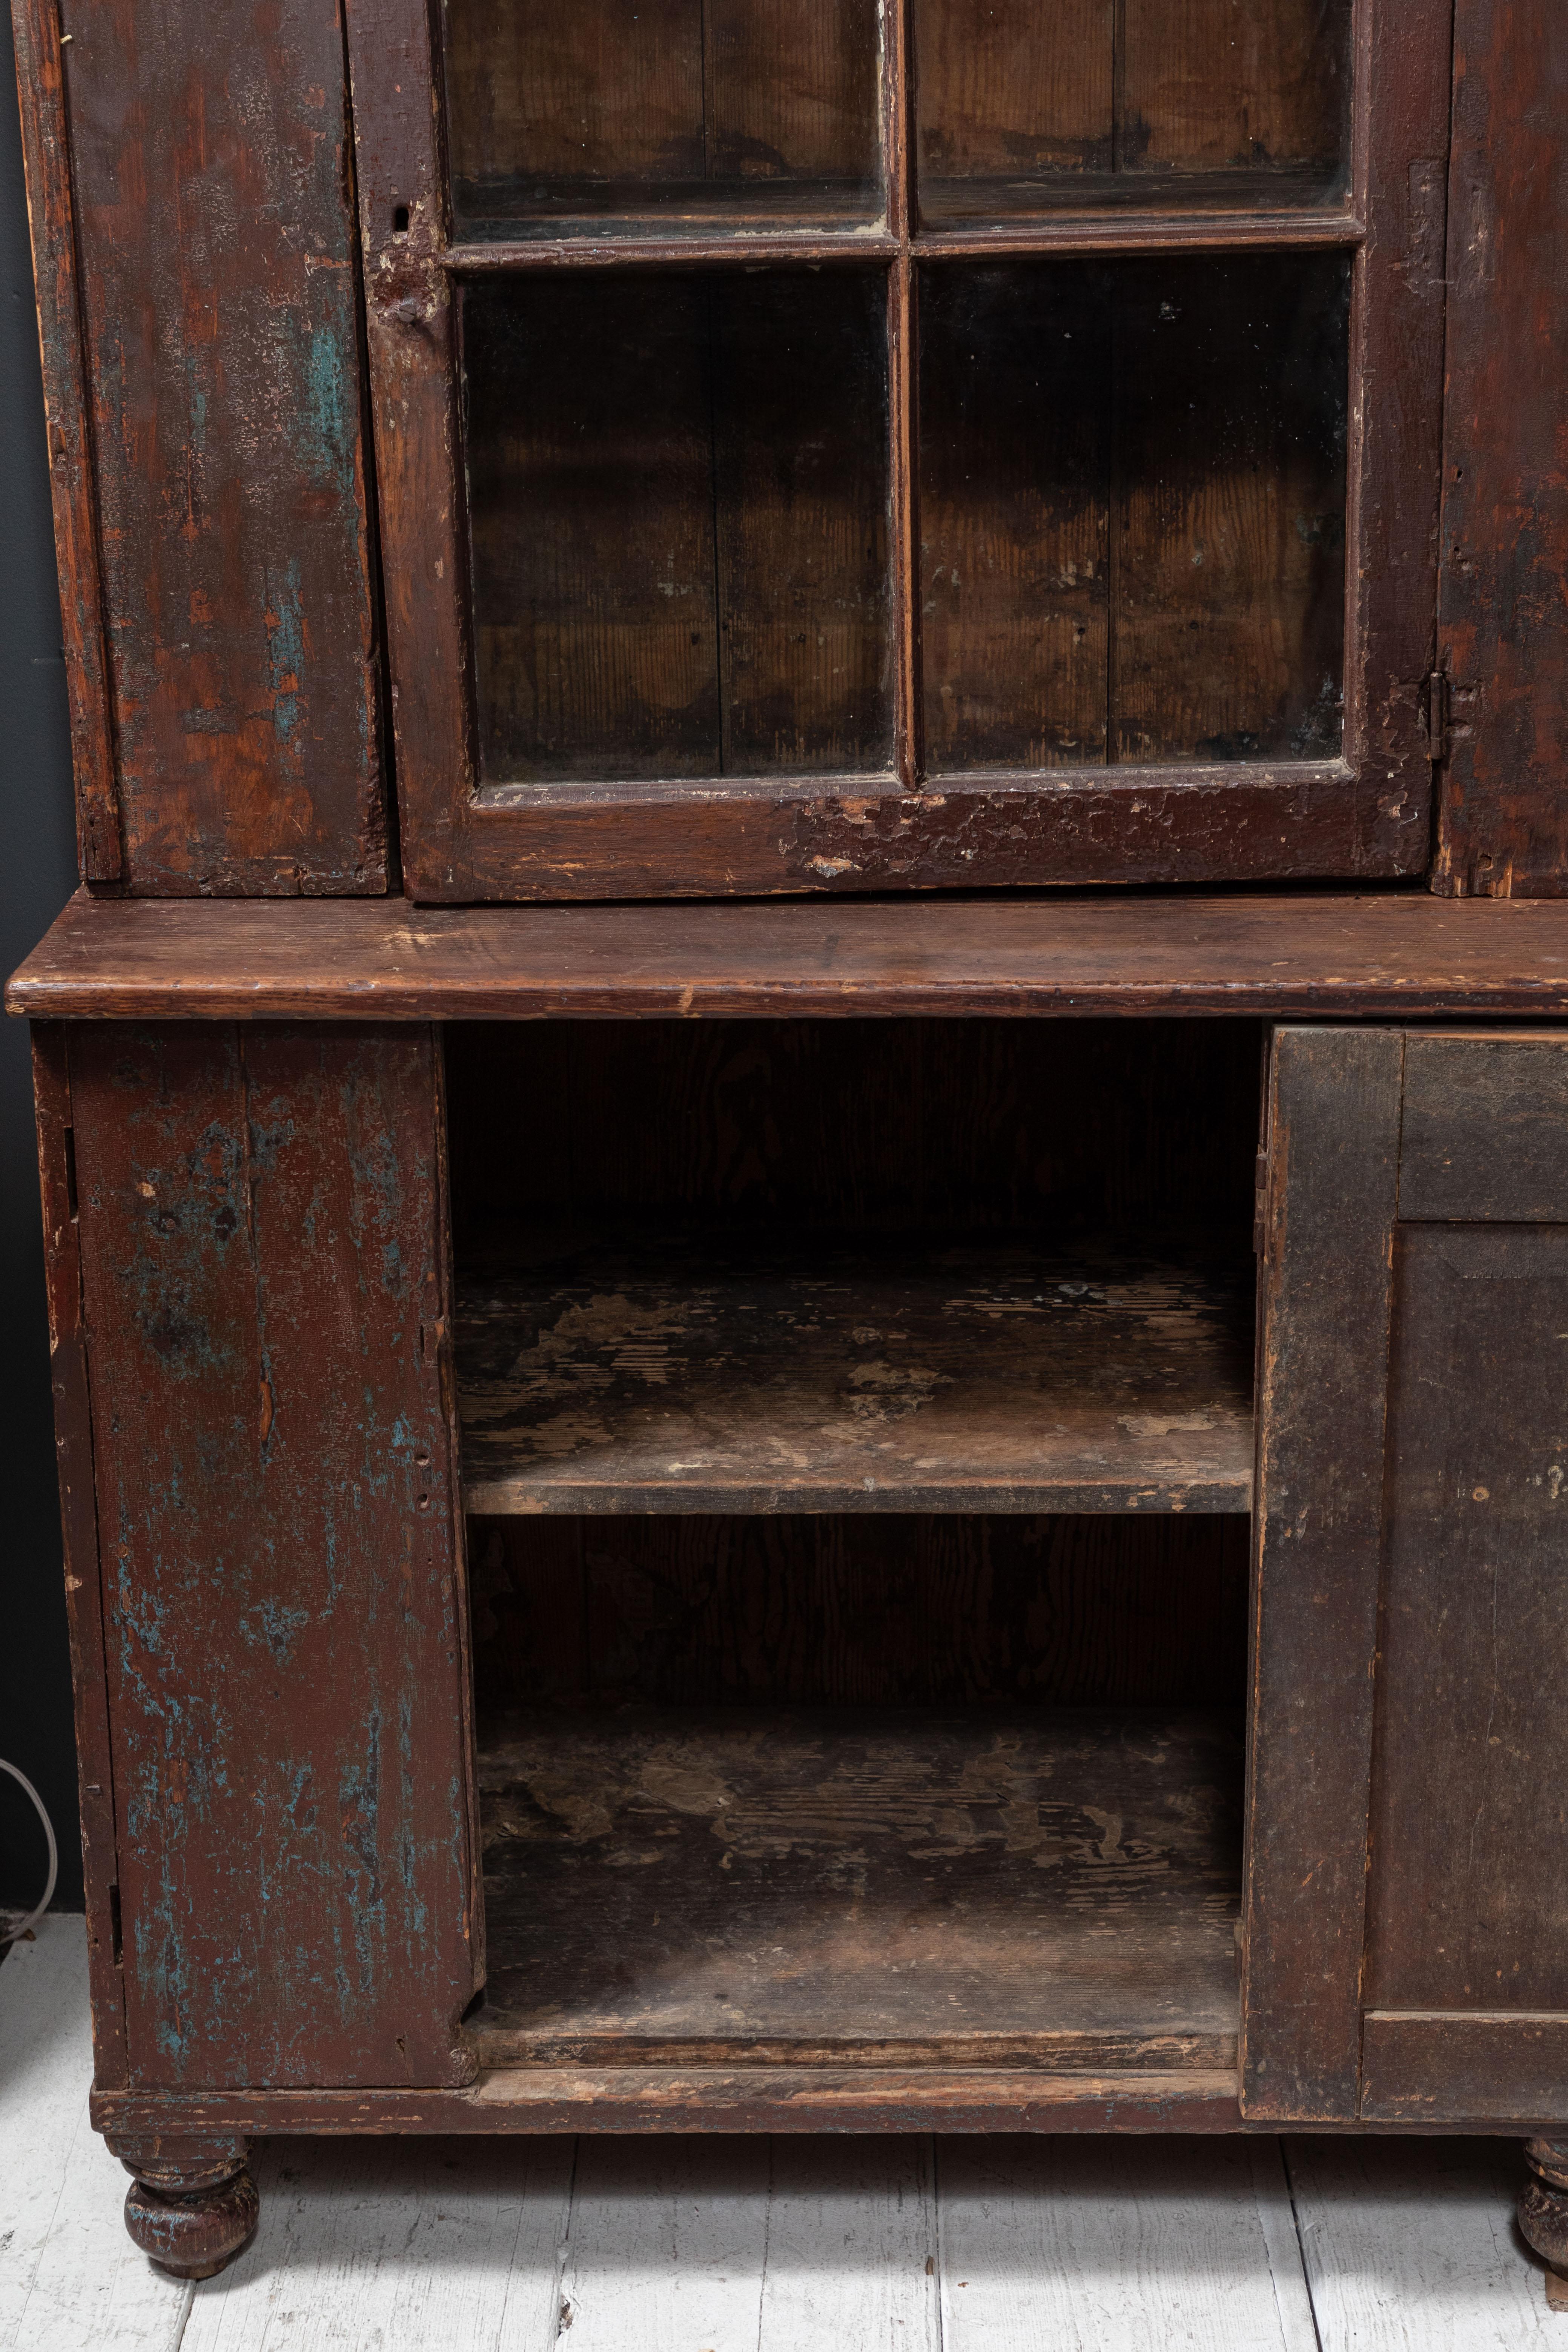 19th Century Early American Dark Wooden Hutch with Glass Door